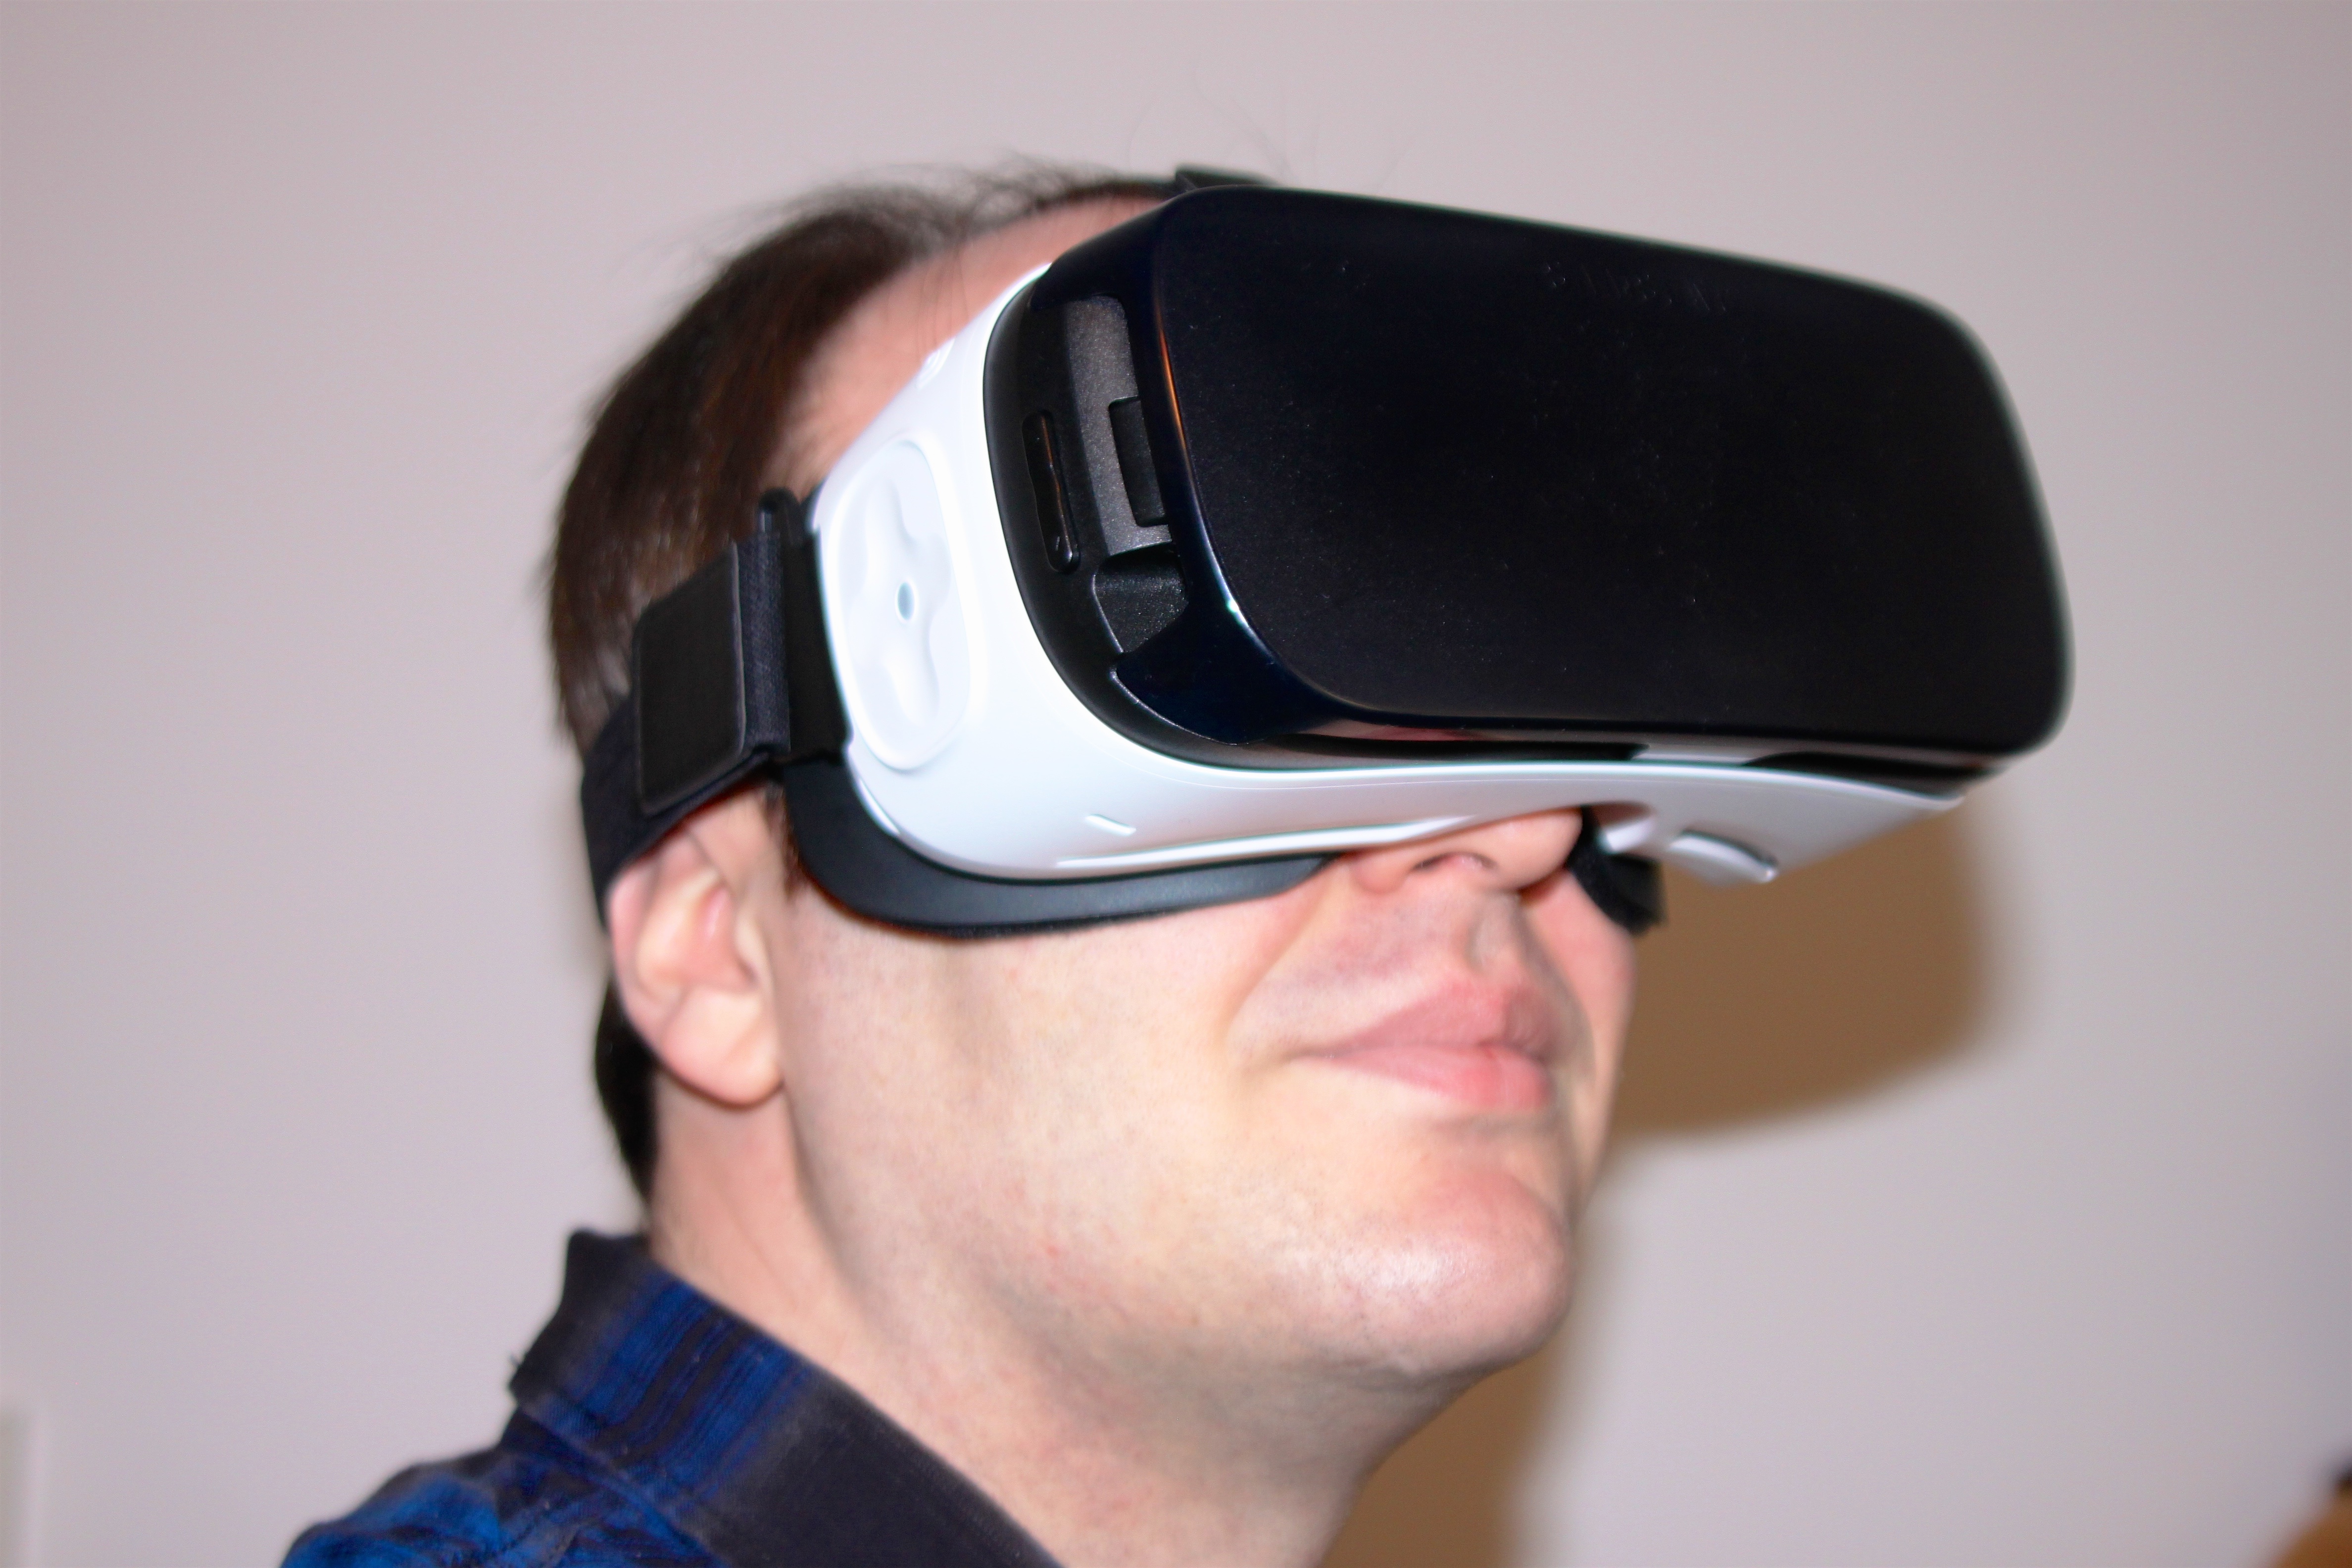 The New Gear Vr Proves Virtual Reality Is Finally Consumer Ready Ars